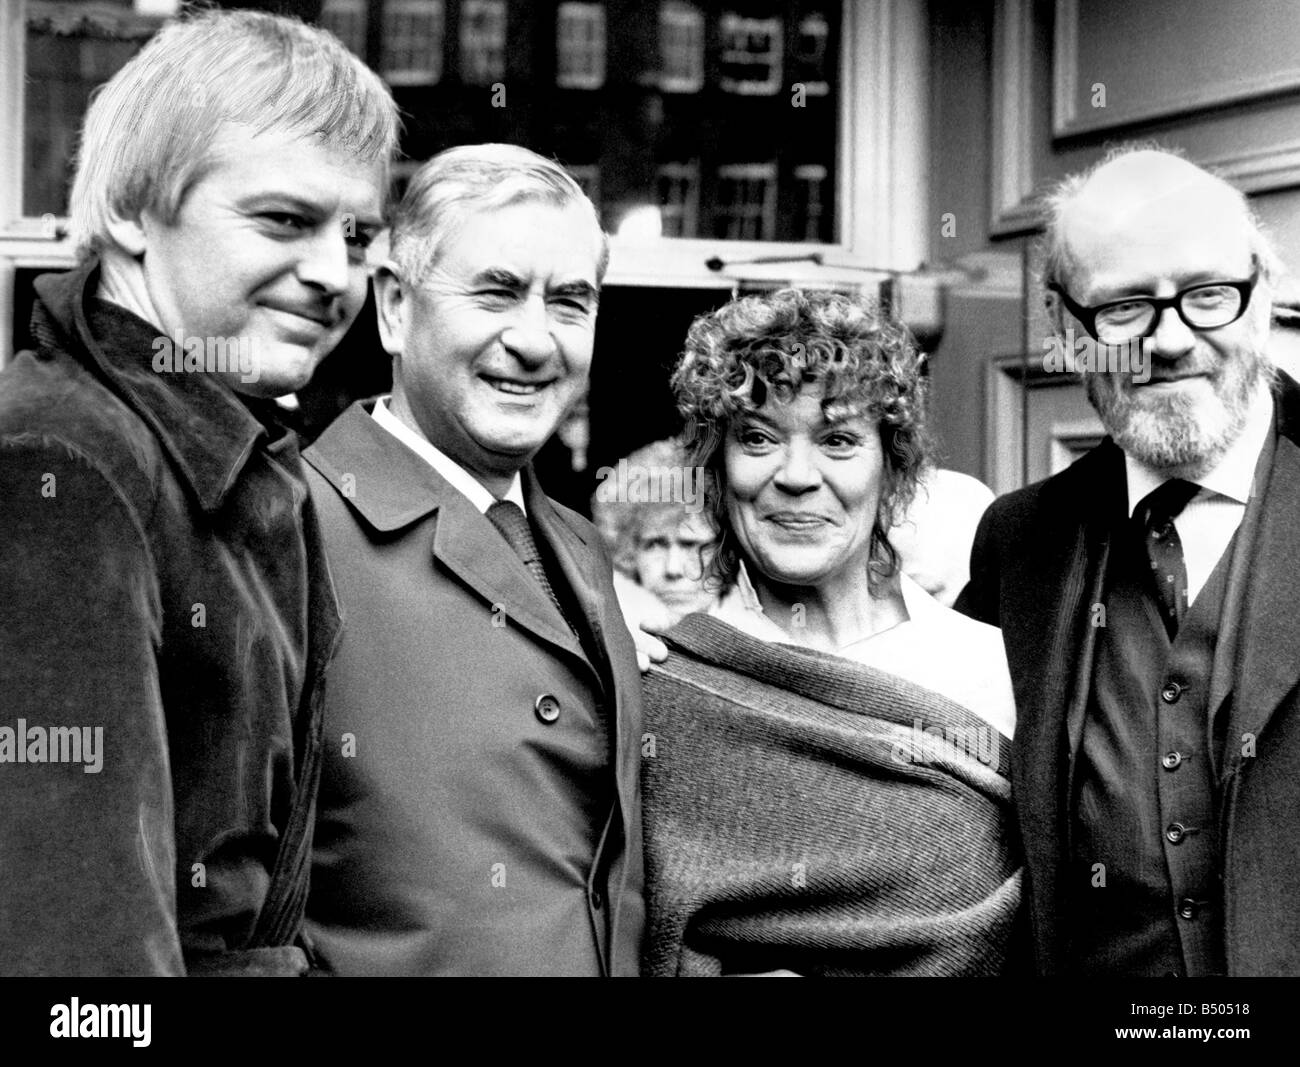 Actors and Actresses;Le Mesurier's Memorial;St Paul's Church - memorial service for actor John Le Mesurier - John's wife Joan and Dad's Army actors Ian Lavender Bill Pertwee and Frank Williams;16/02/1984;Brendan Monks staff 84/802 Stock Photo